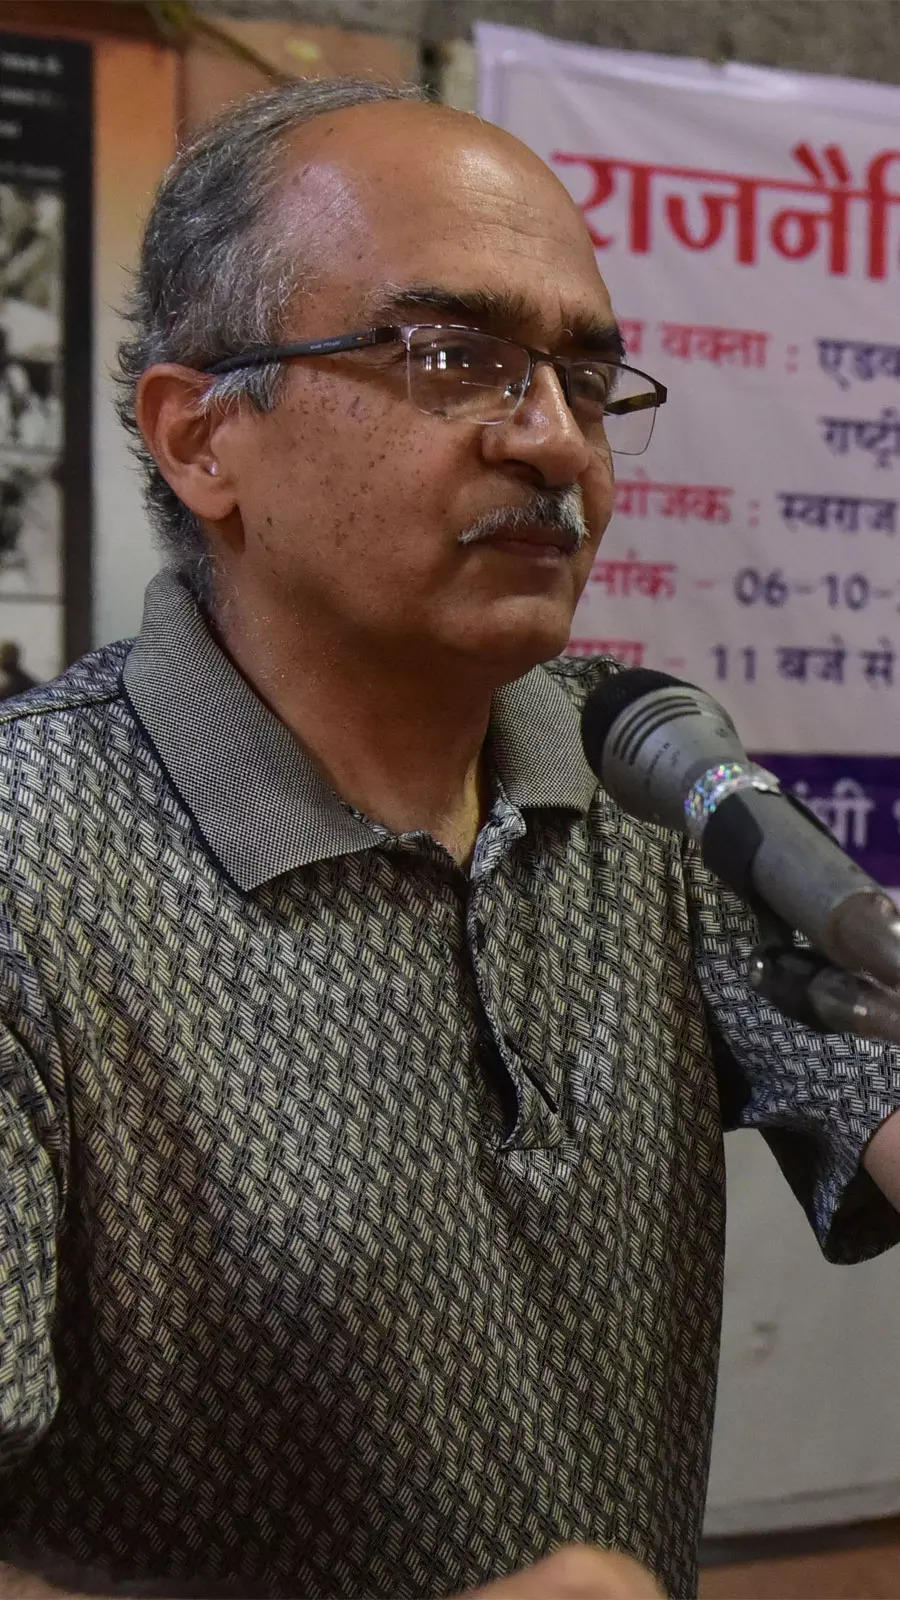 <p>Throughout his career, Bhushan has been a staunch defender of civil liberties and human rights, taking on cases involving freedom of speech, right to information, and protection of marginalized communities.</p>